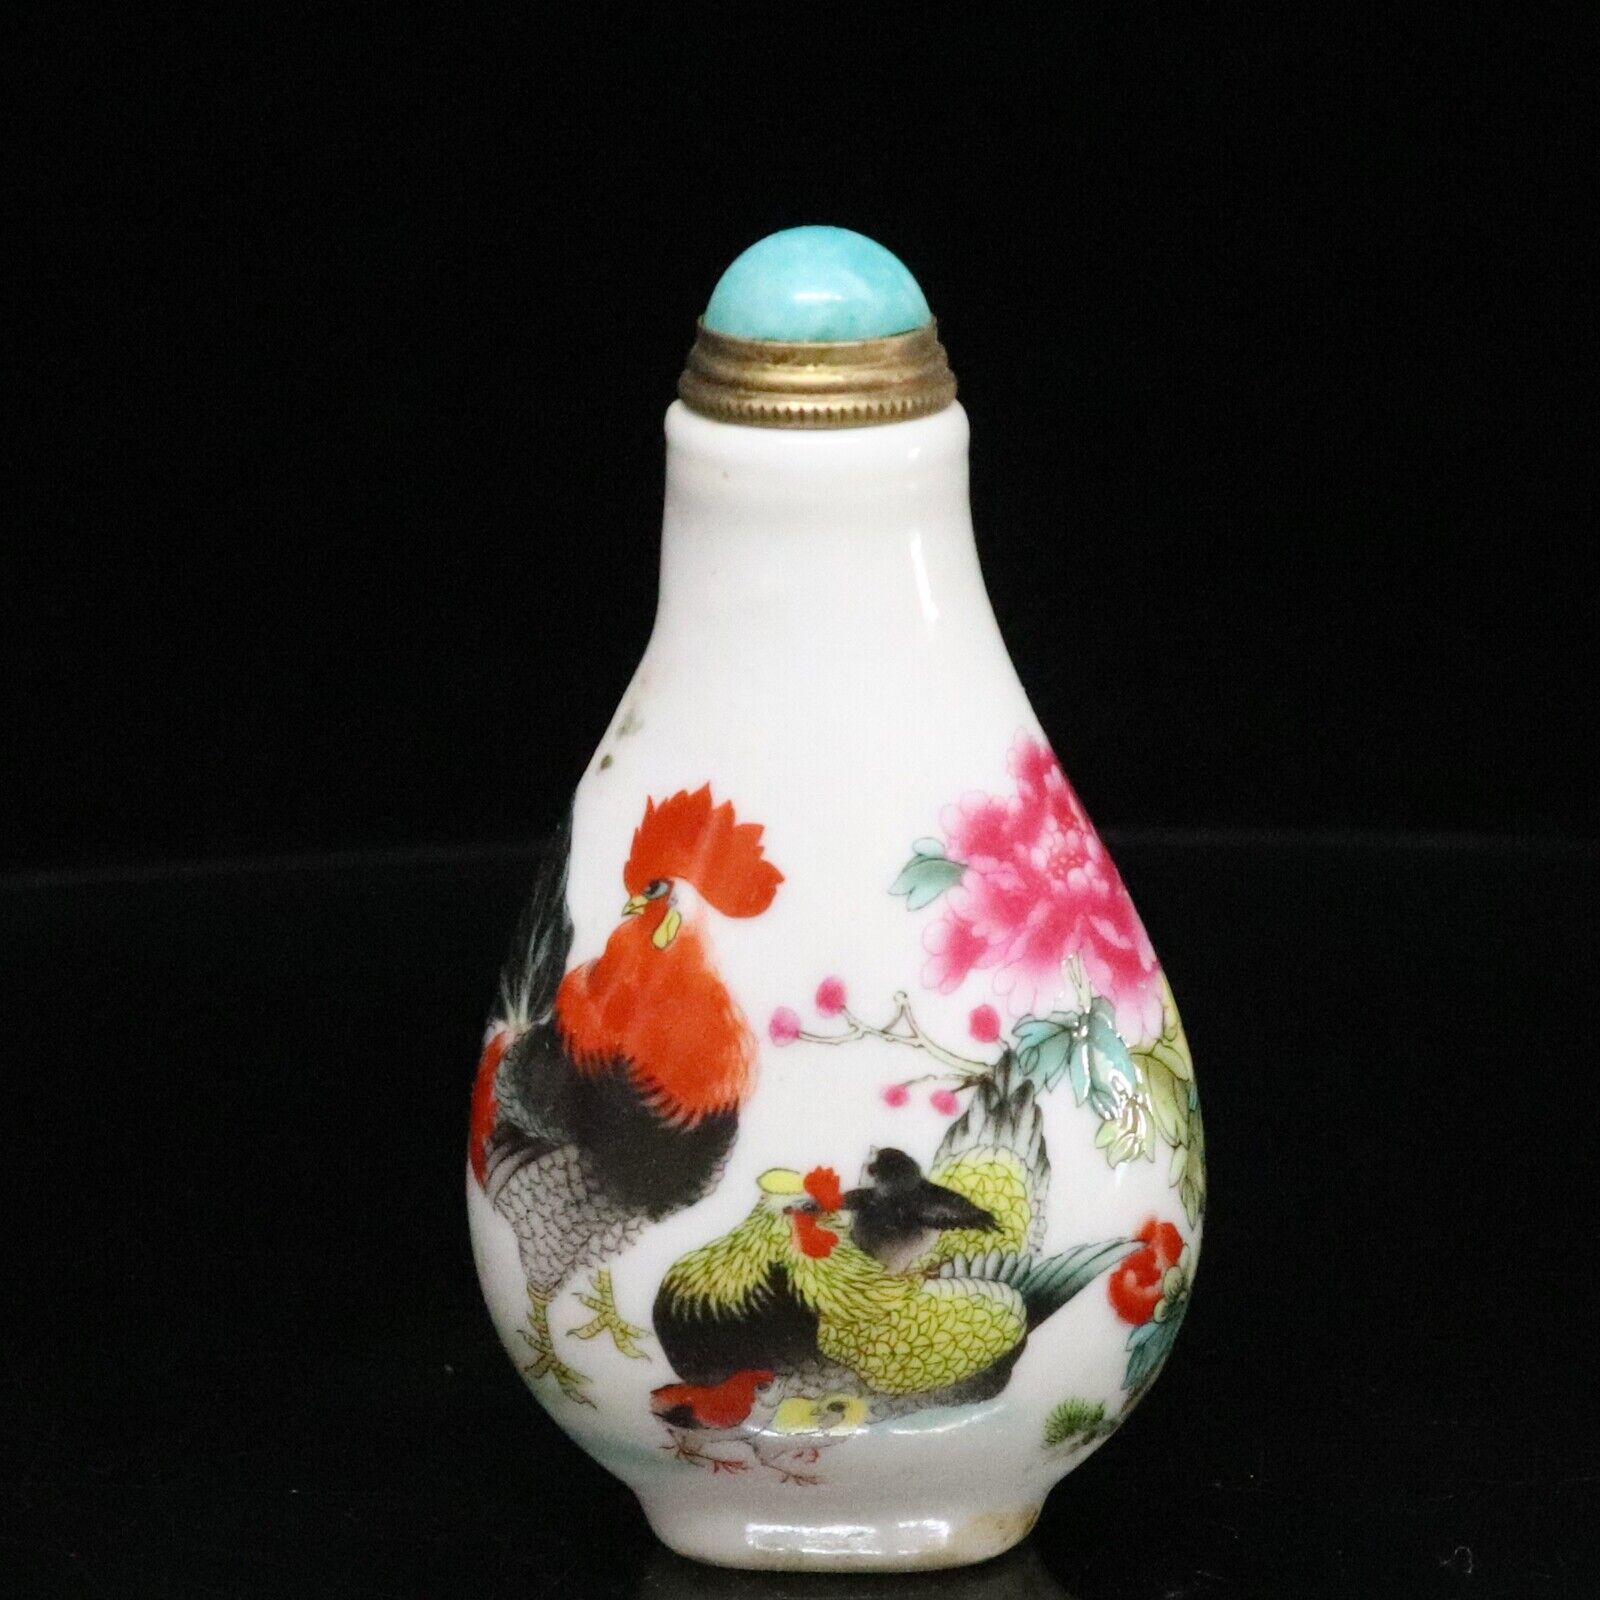 Chinese Porcelain Handmade Exquisite Snuff Bottles 91646